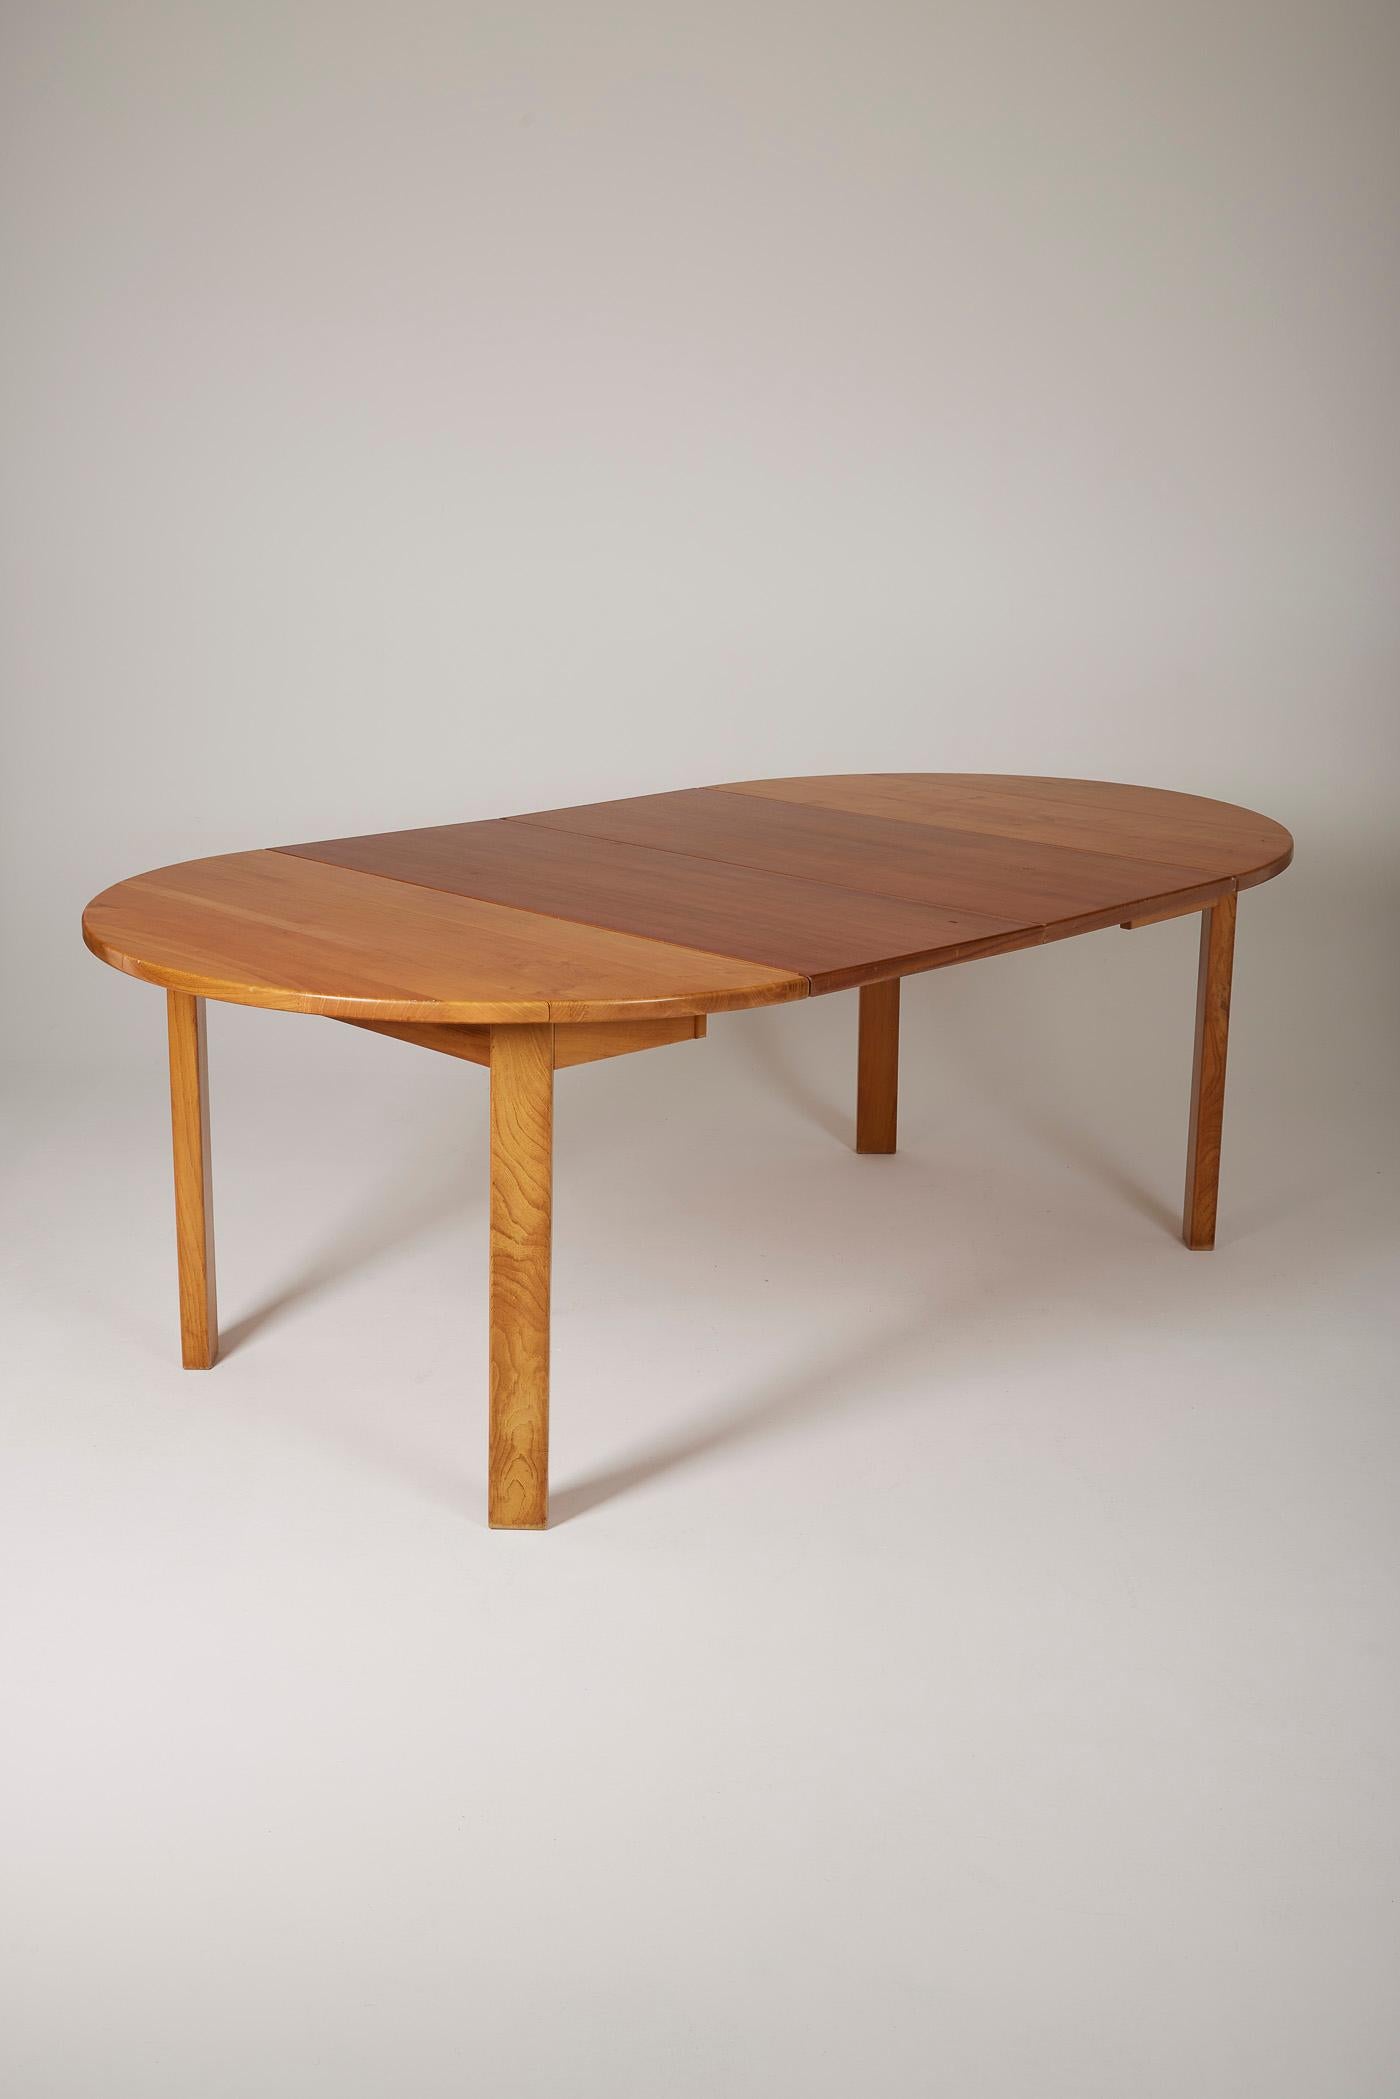 Wood Elm dining table